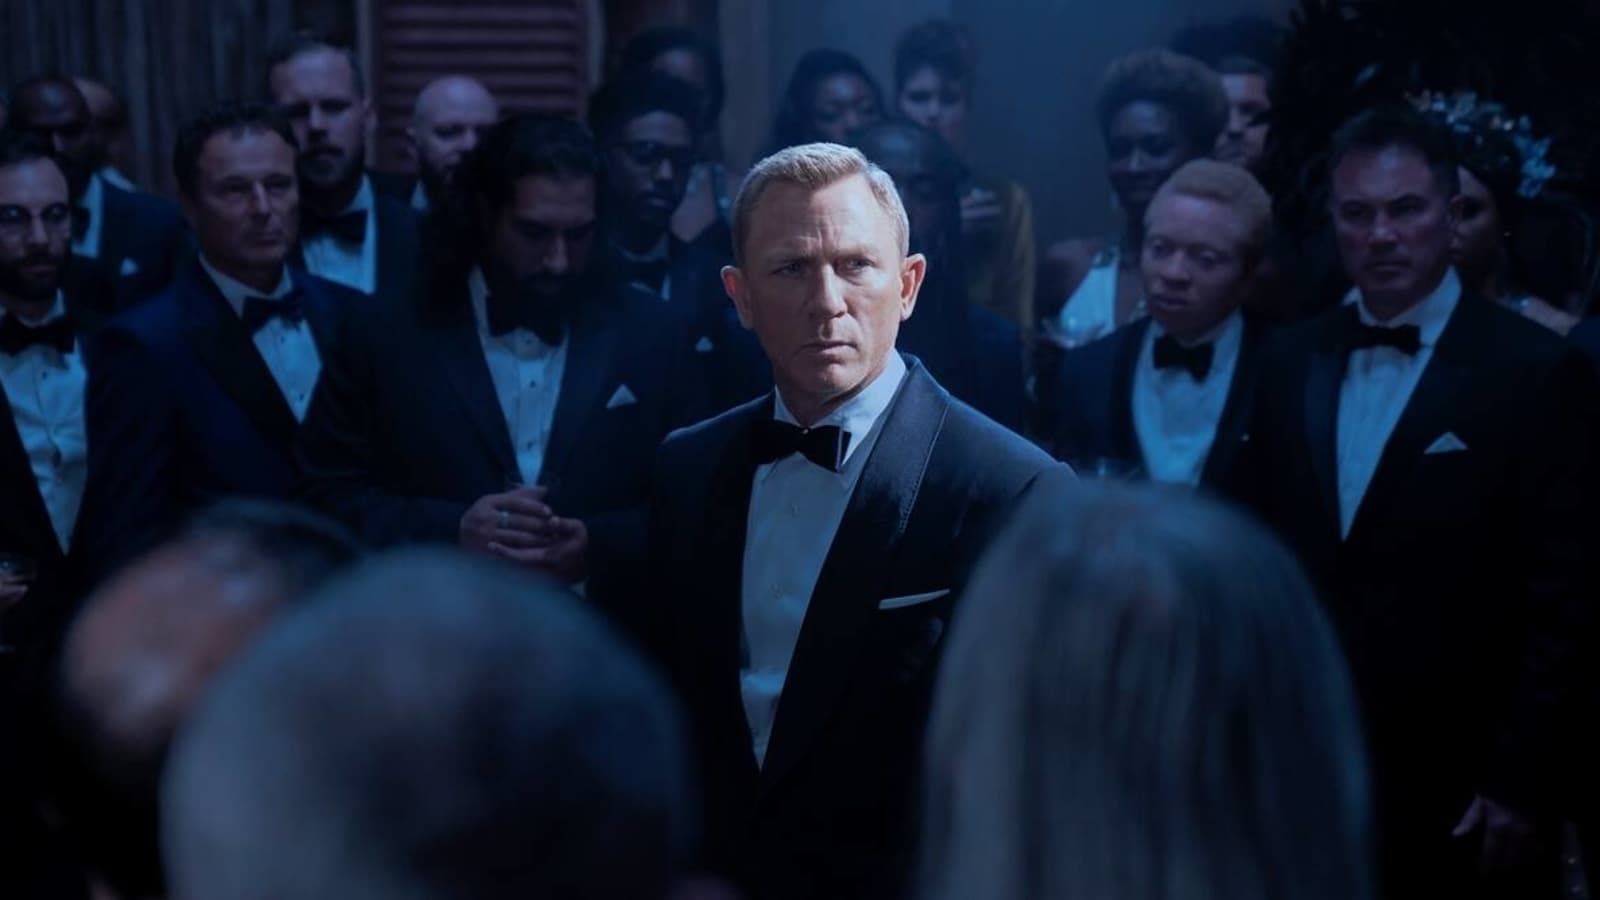 Before No Time To Die, Daniel Craig said he'd rather 'slash his wrists'  than play Bond again after Spectre | Bollywood - Hindustan Times